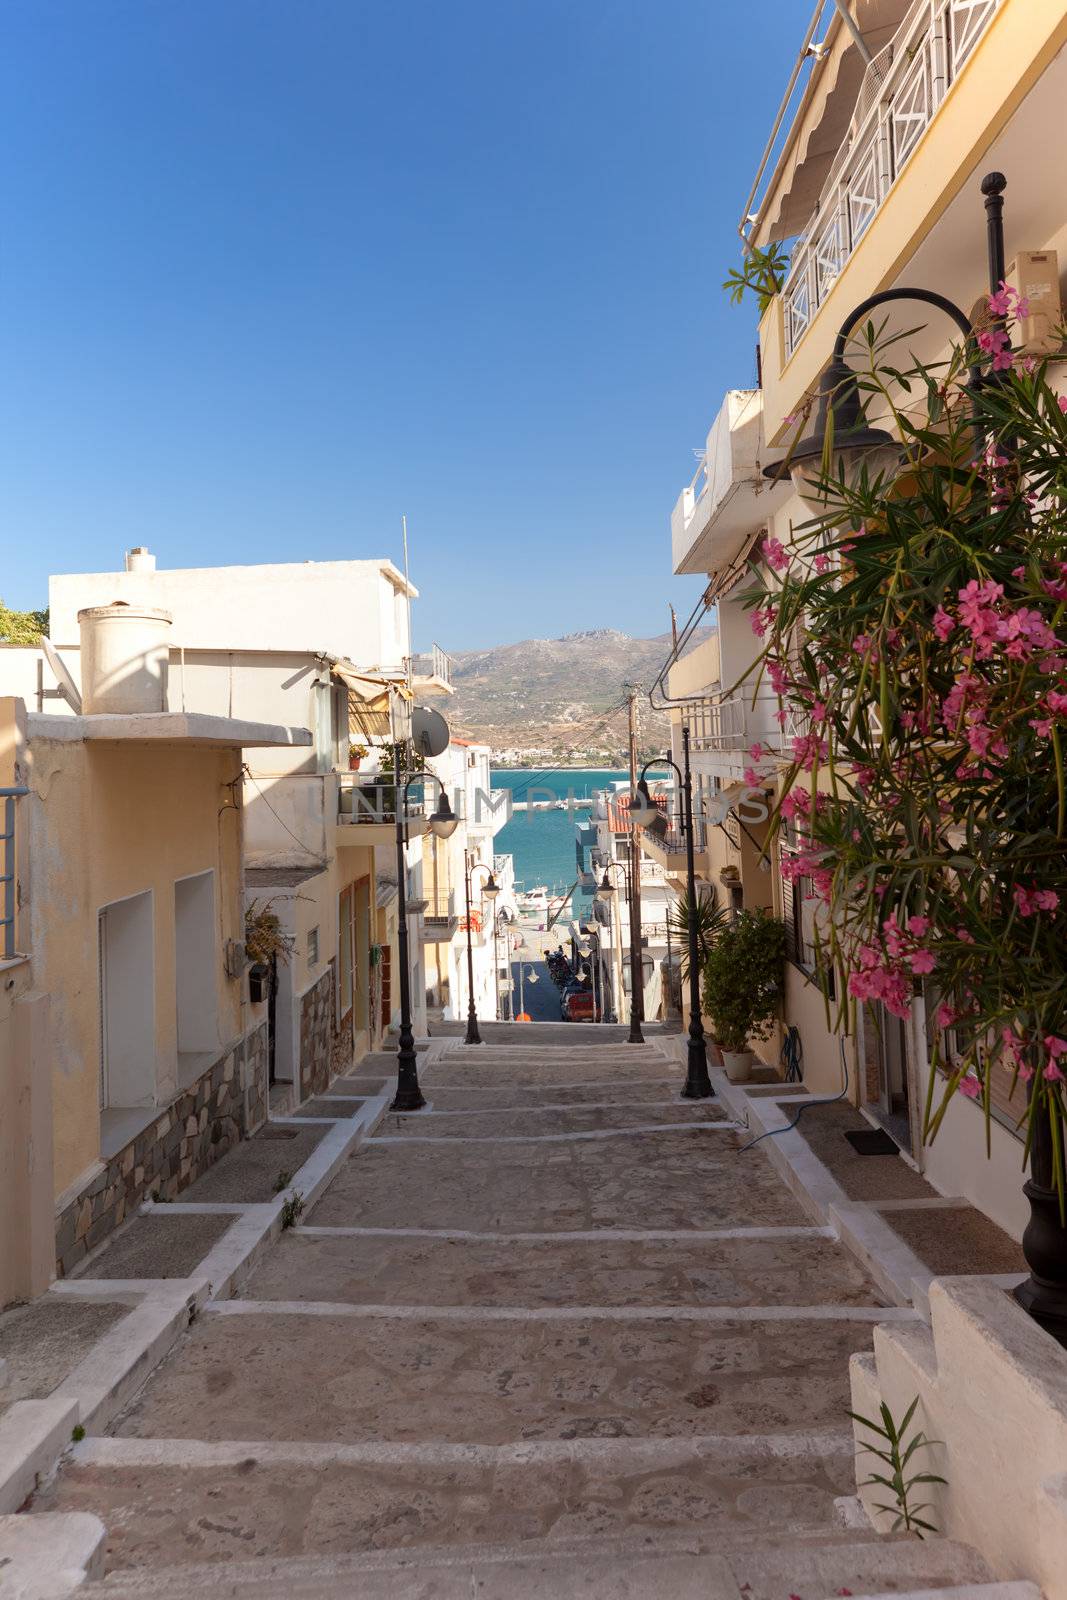 A walking path with steps in the town of Sitia by DimasEKB